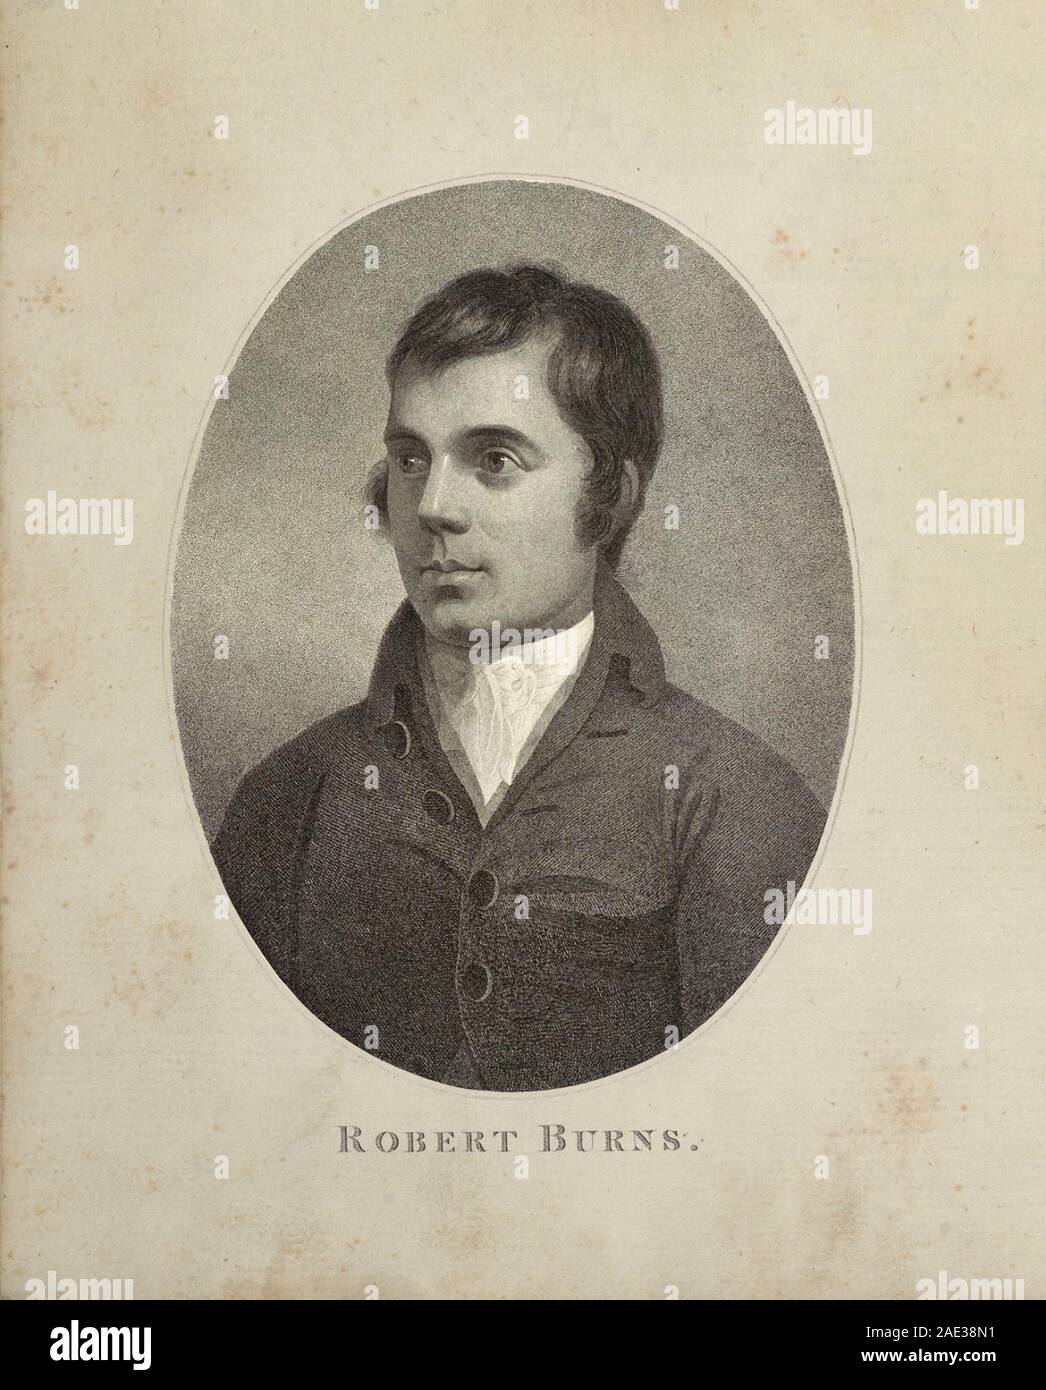 Robert Burns (1759-1796) was a Scottish poet, folklorist, author of numerous poems and poems written in so-called plain Scottish and English. National Stock Photo